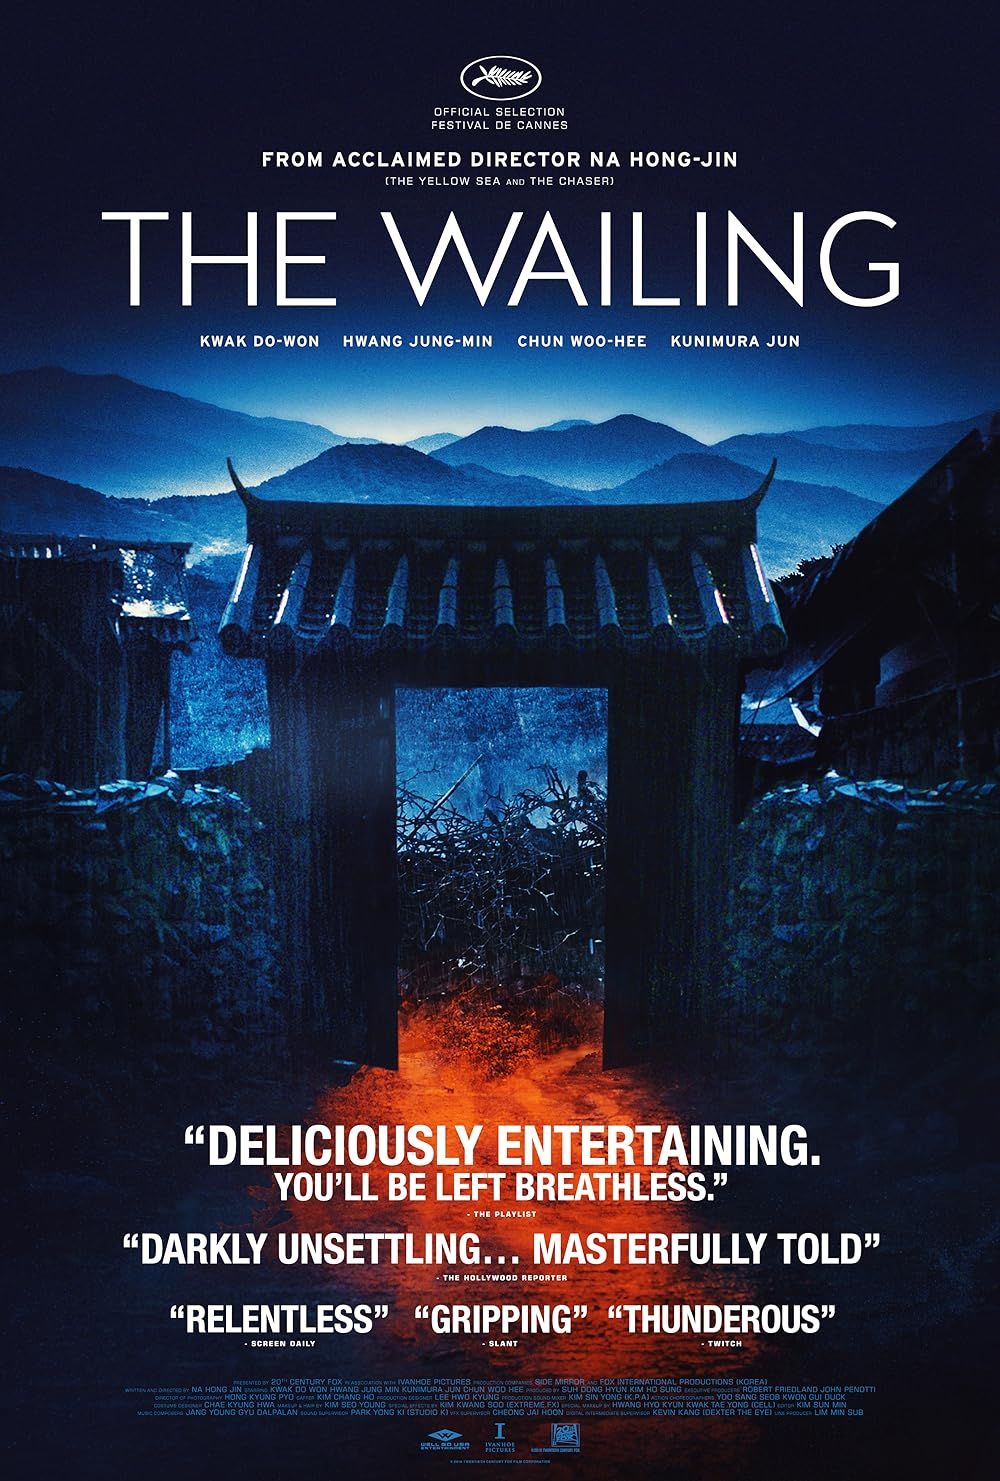 An eerie red light illuminates a thicket seen through a gateway on The Wailing poster